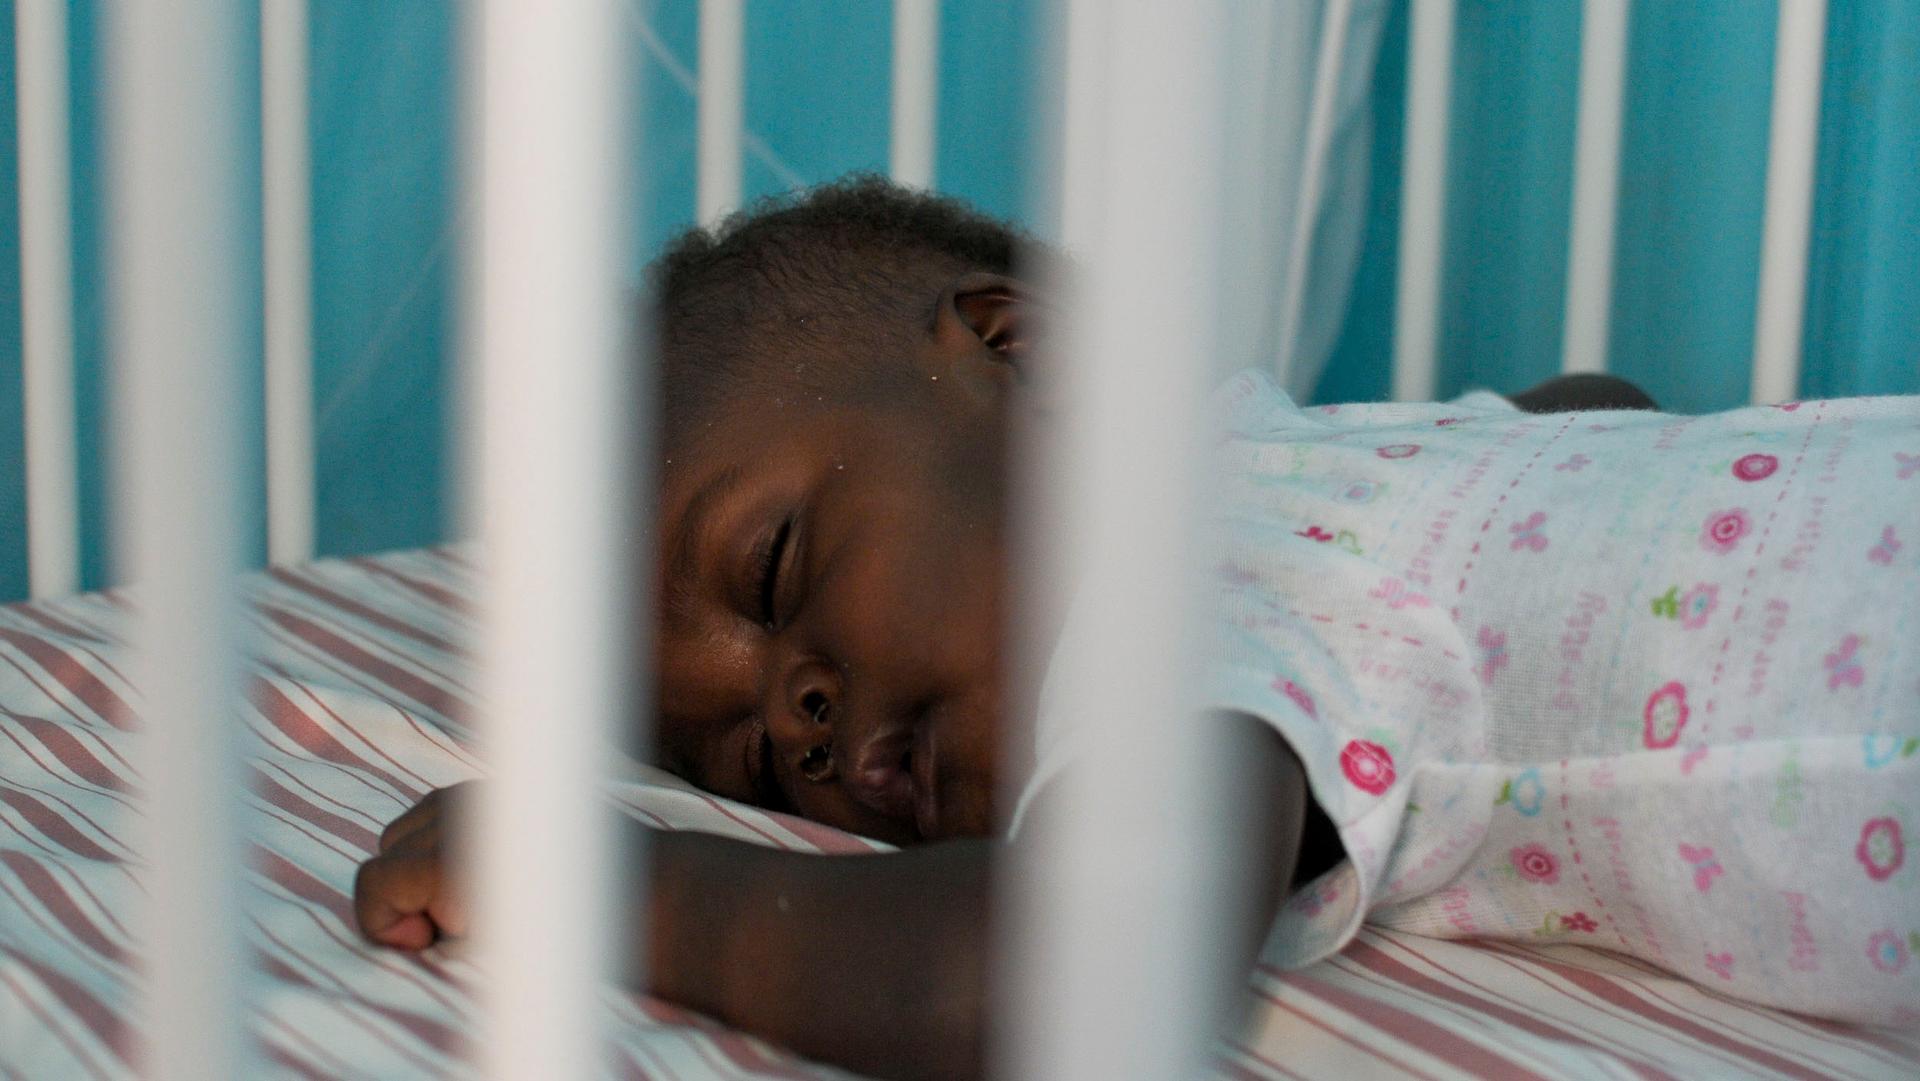 A Haitian child who will be placed for adoption sleeps in his crib at an orphanage outside of Port-au-Prince.